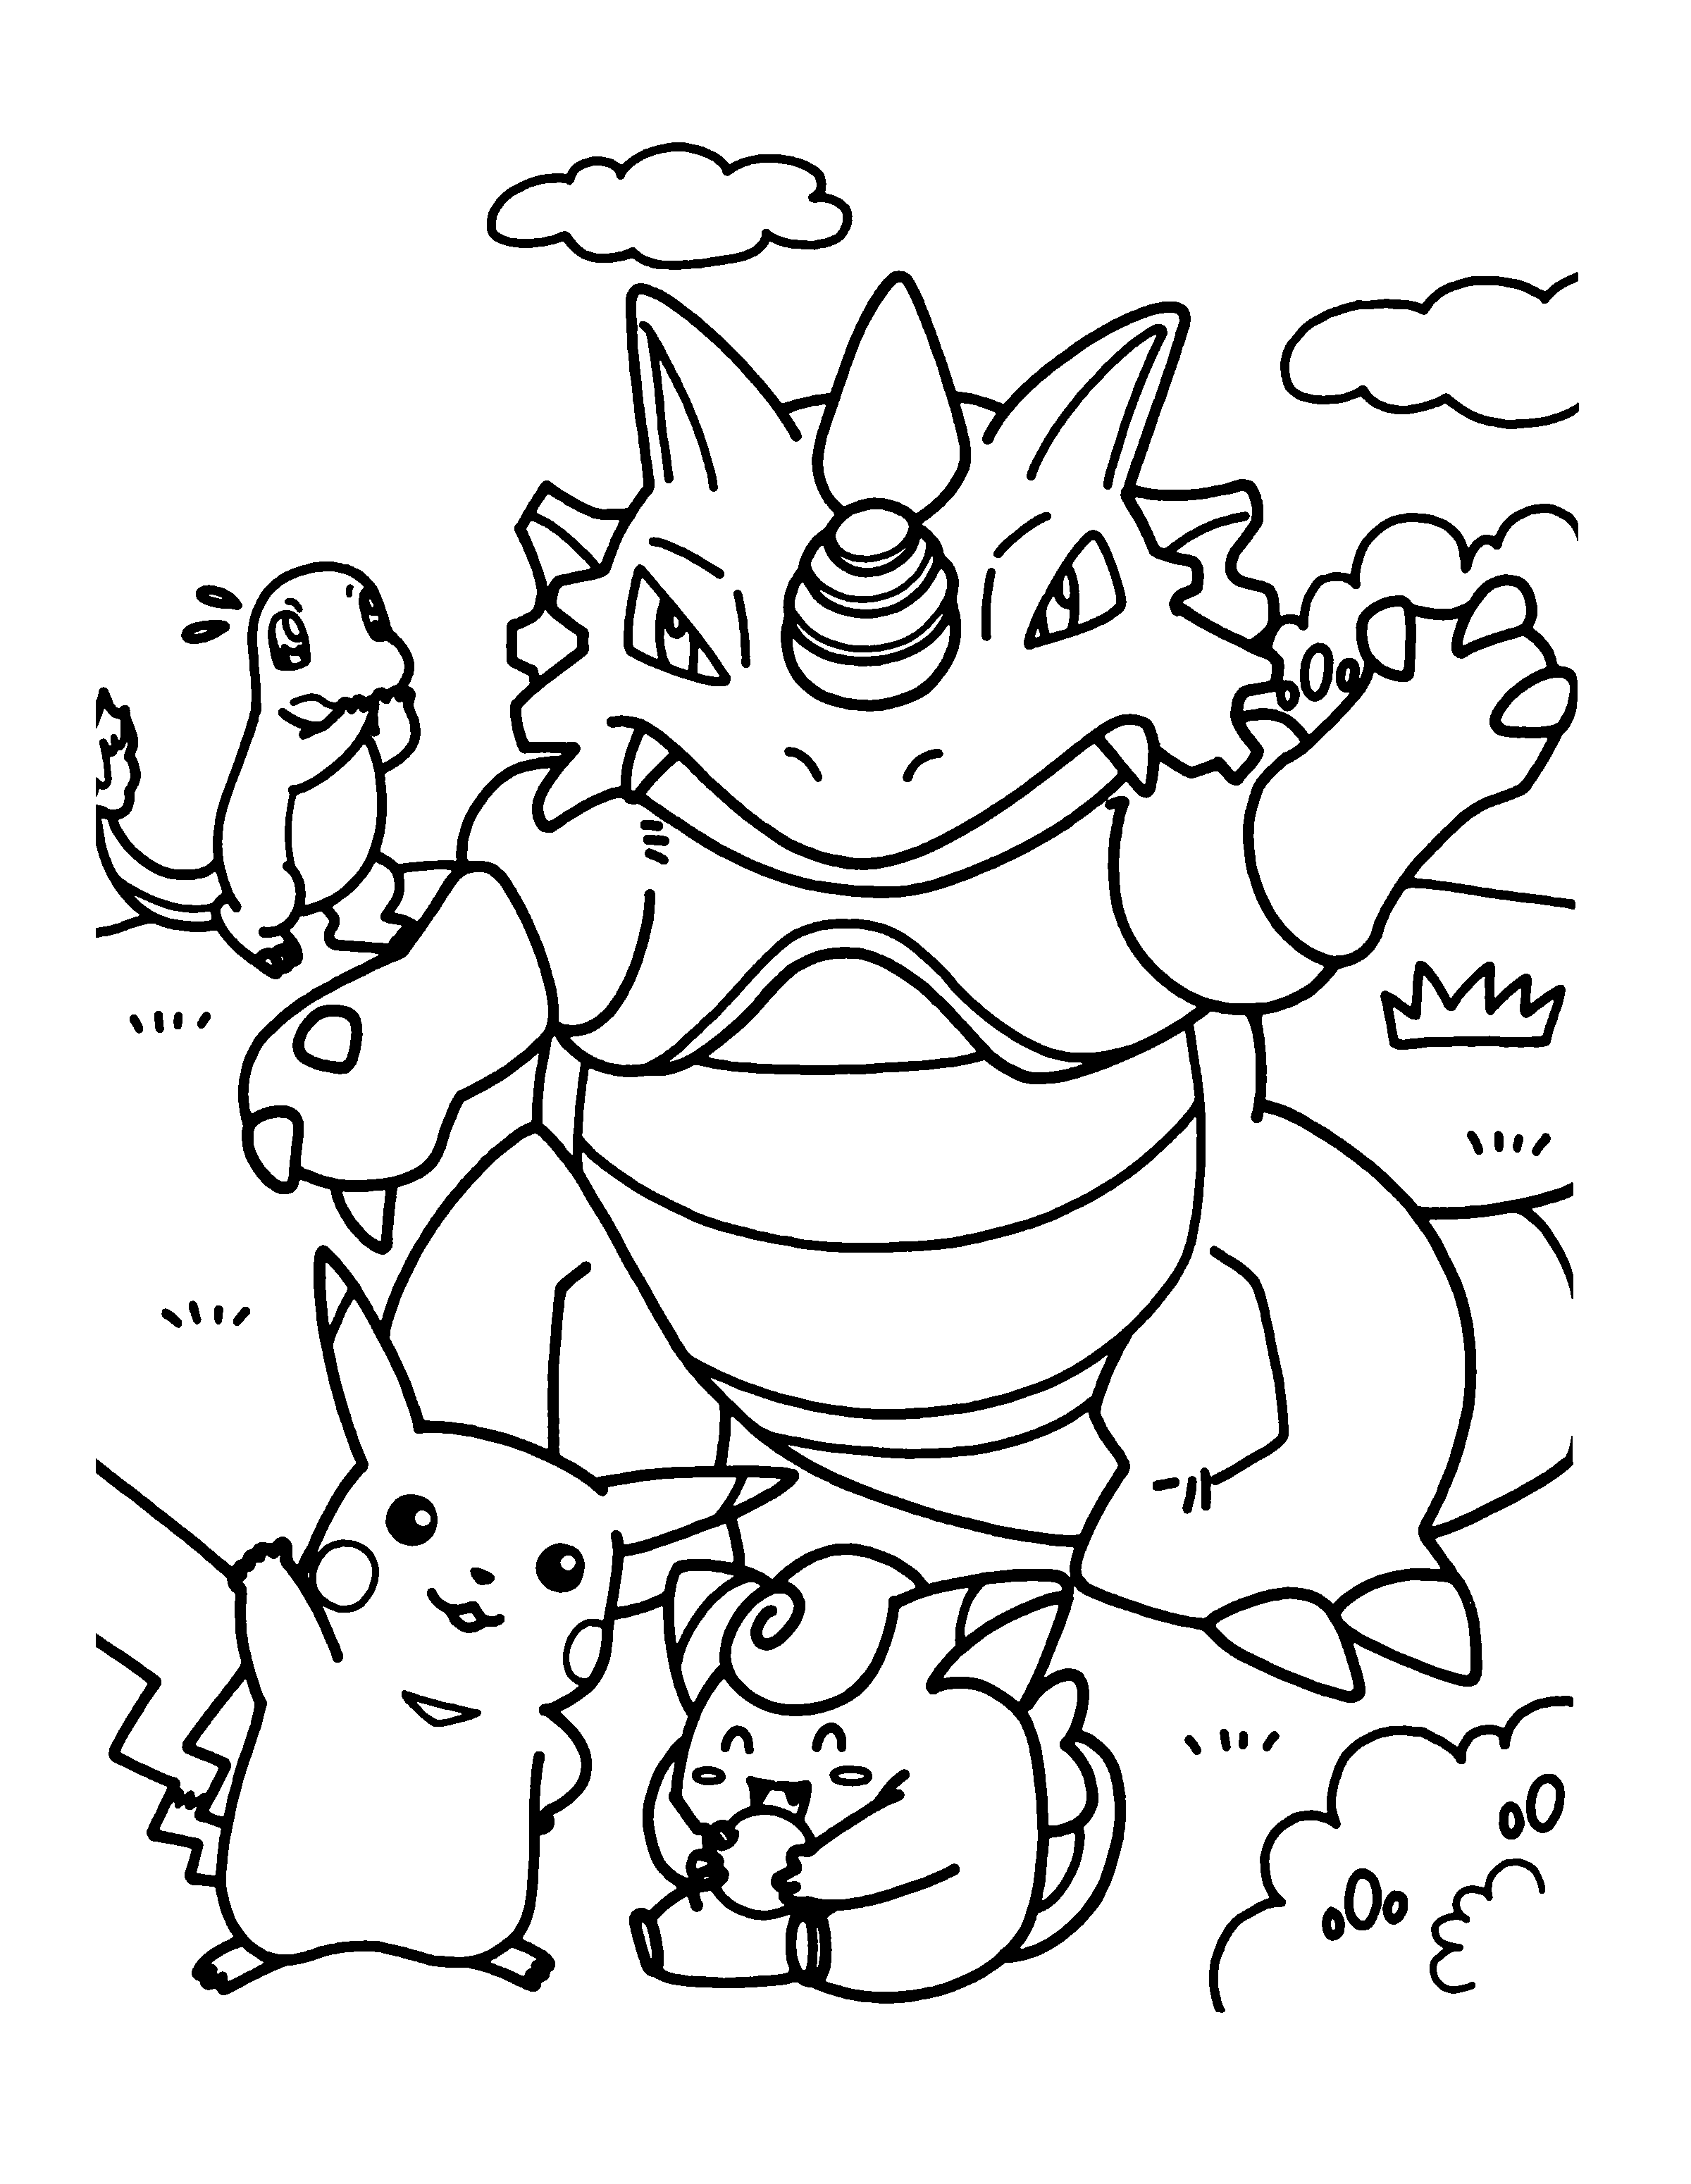 Pokemon Coloring Pages For Adults - Coloring Home